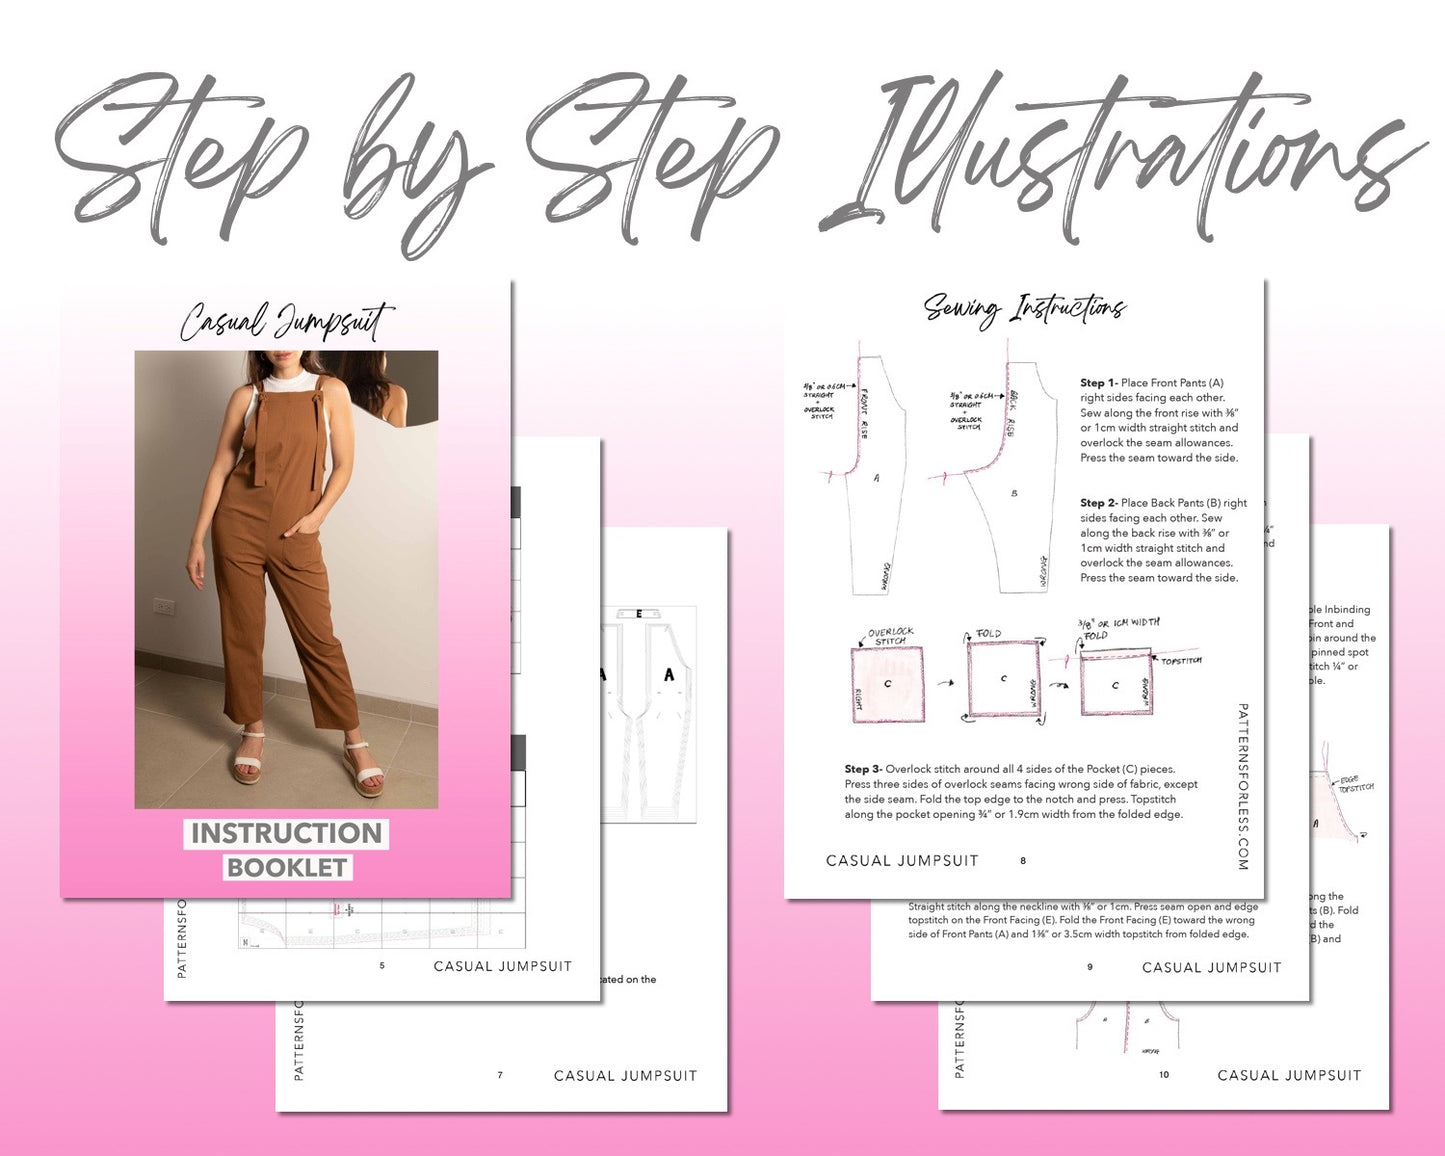 Casual Jumpsuit sewing pattern step by step illustrations.